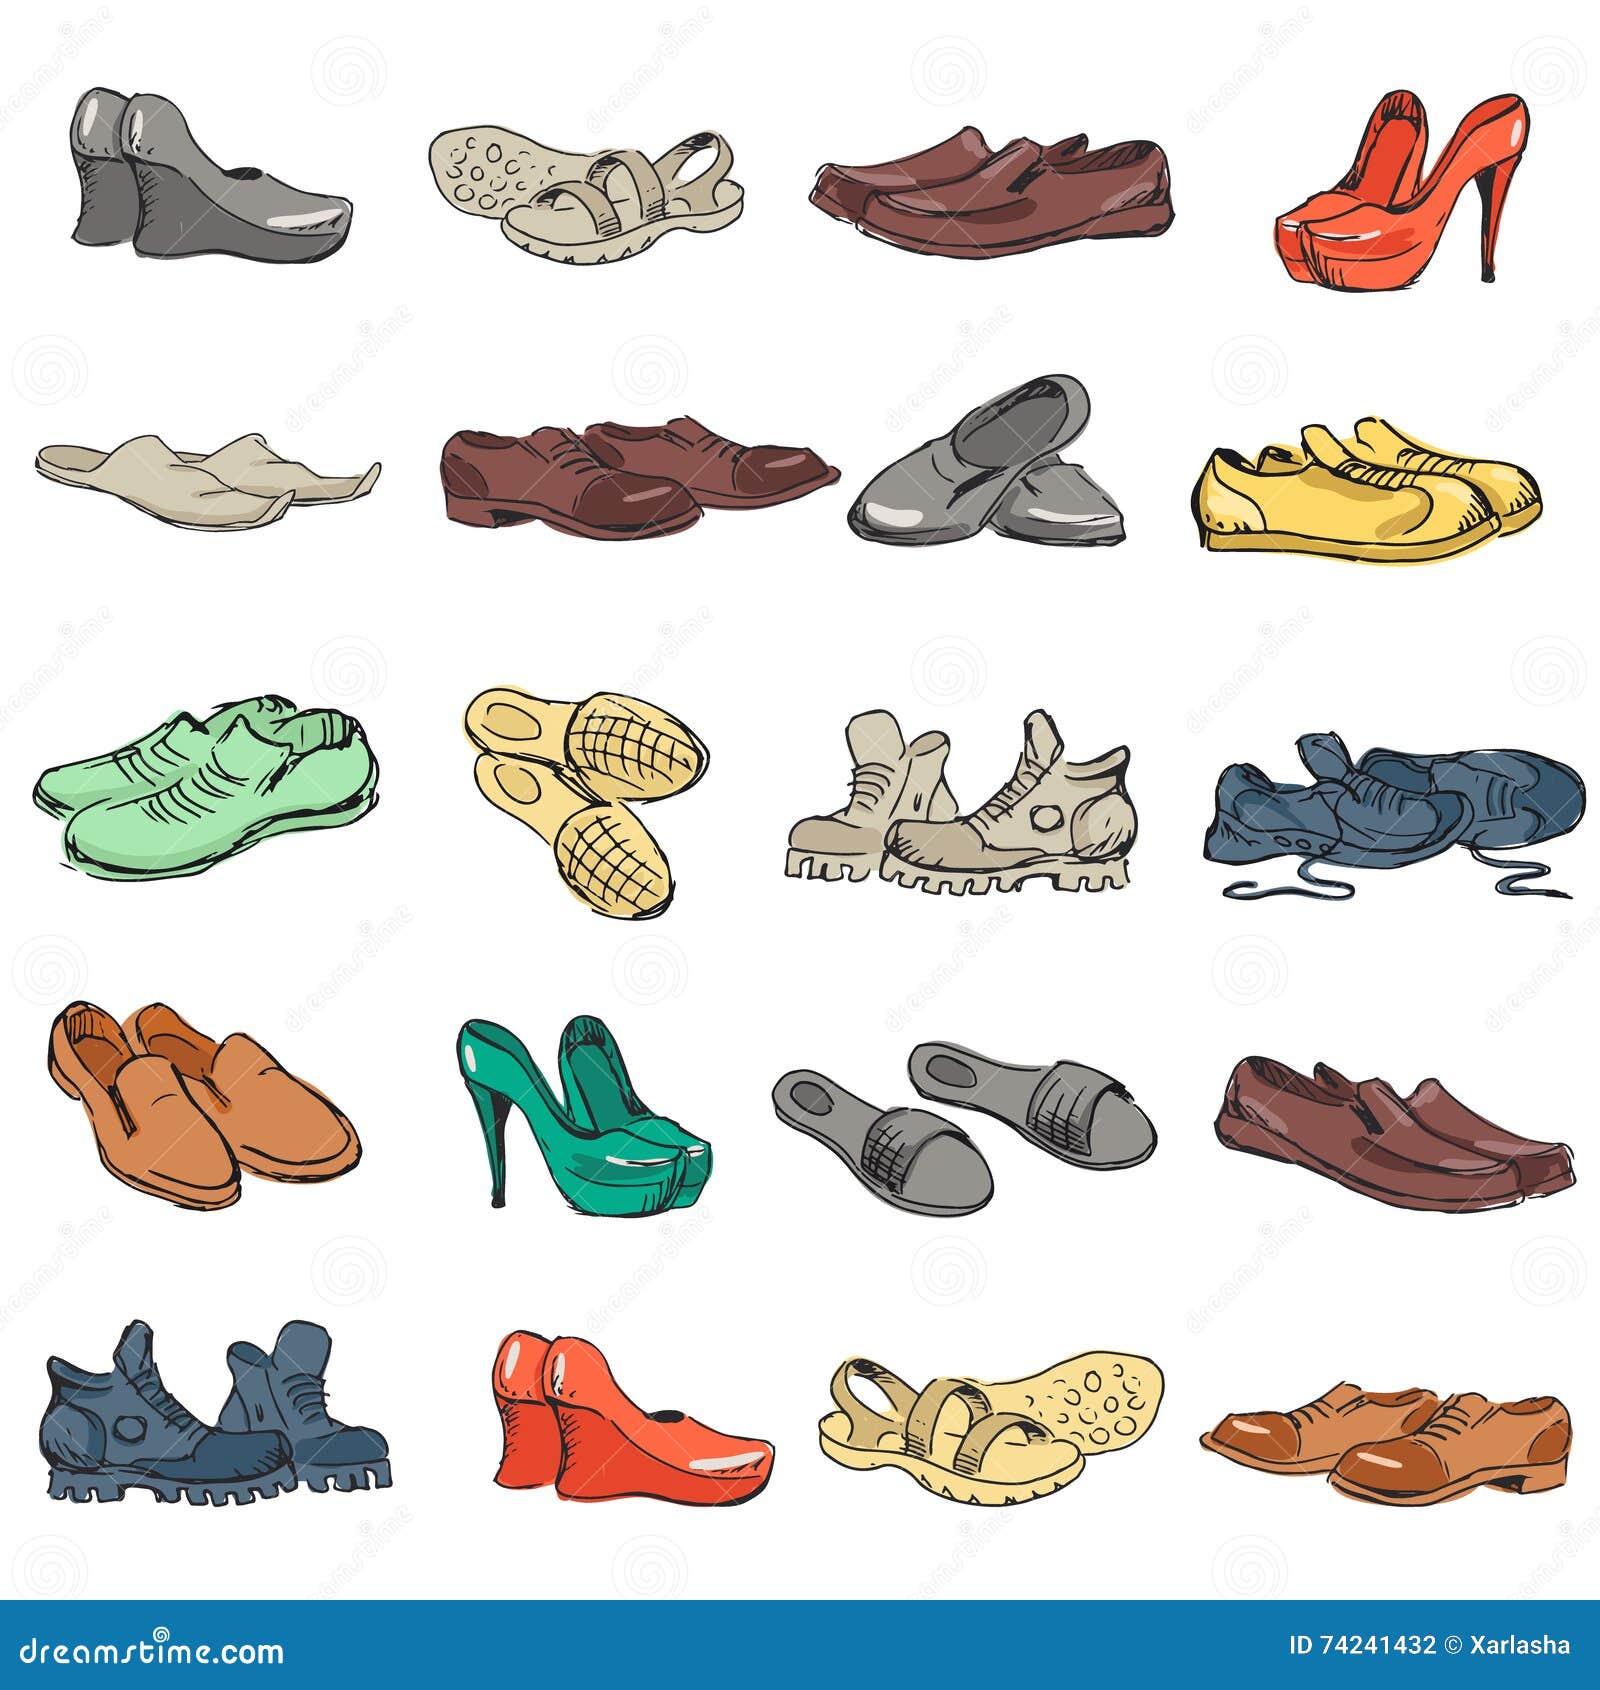 Sneakers shoes clipart design illustration 9385475 PNG